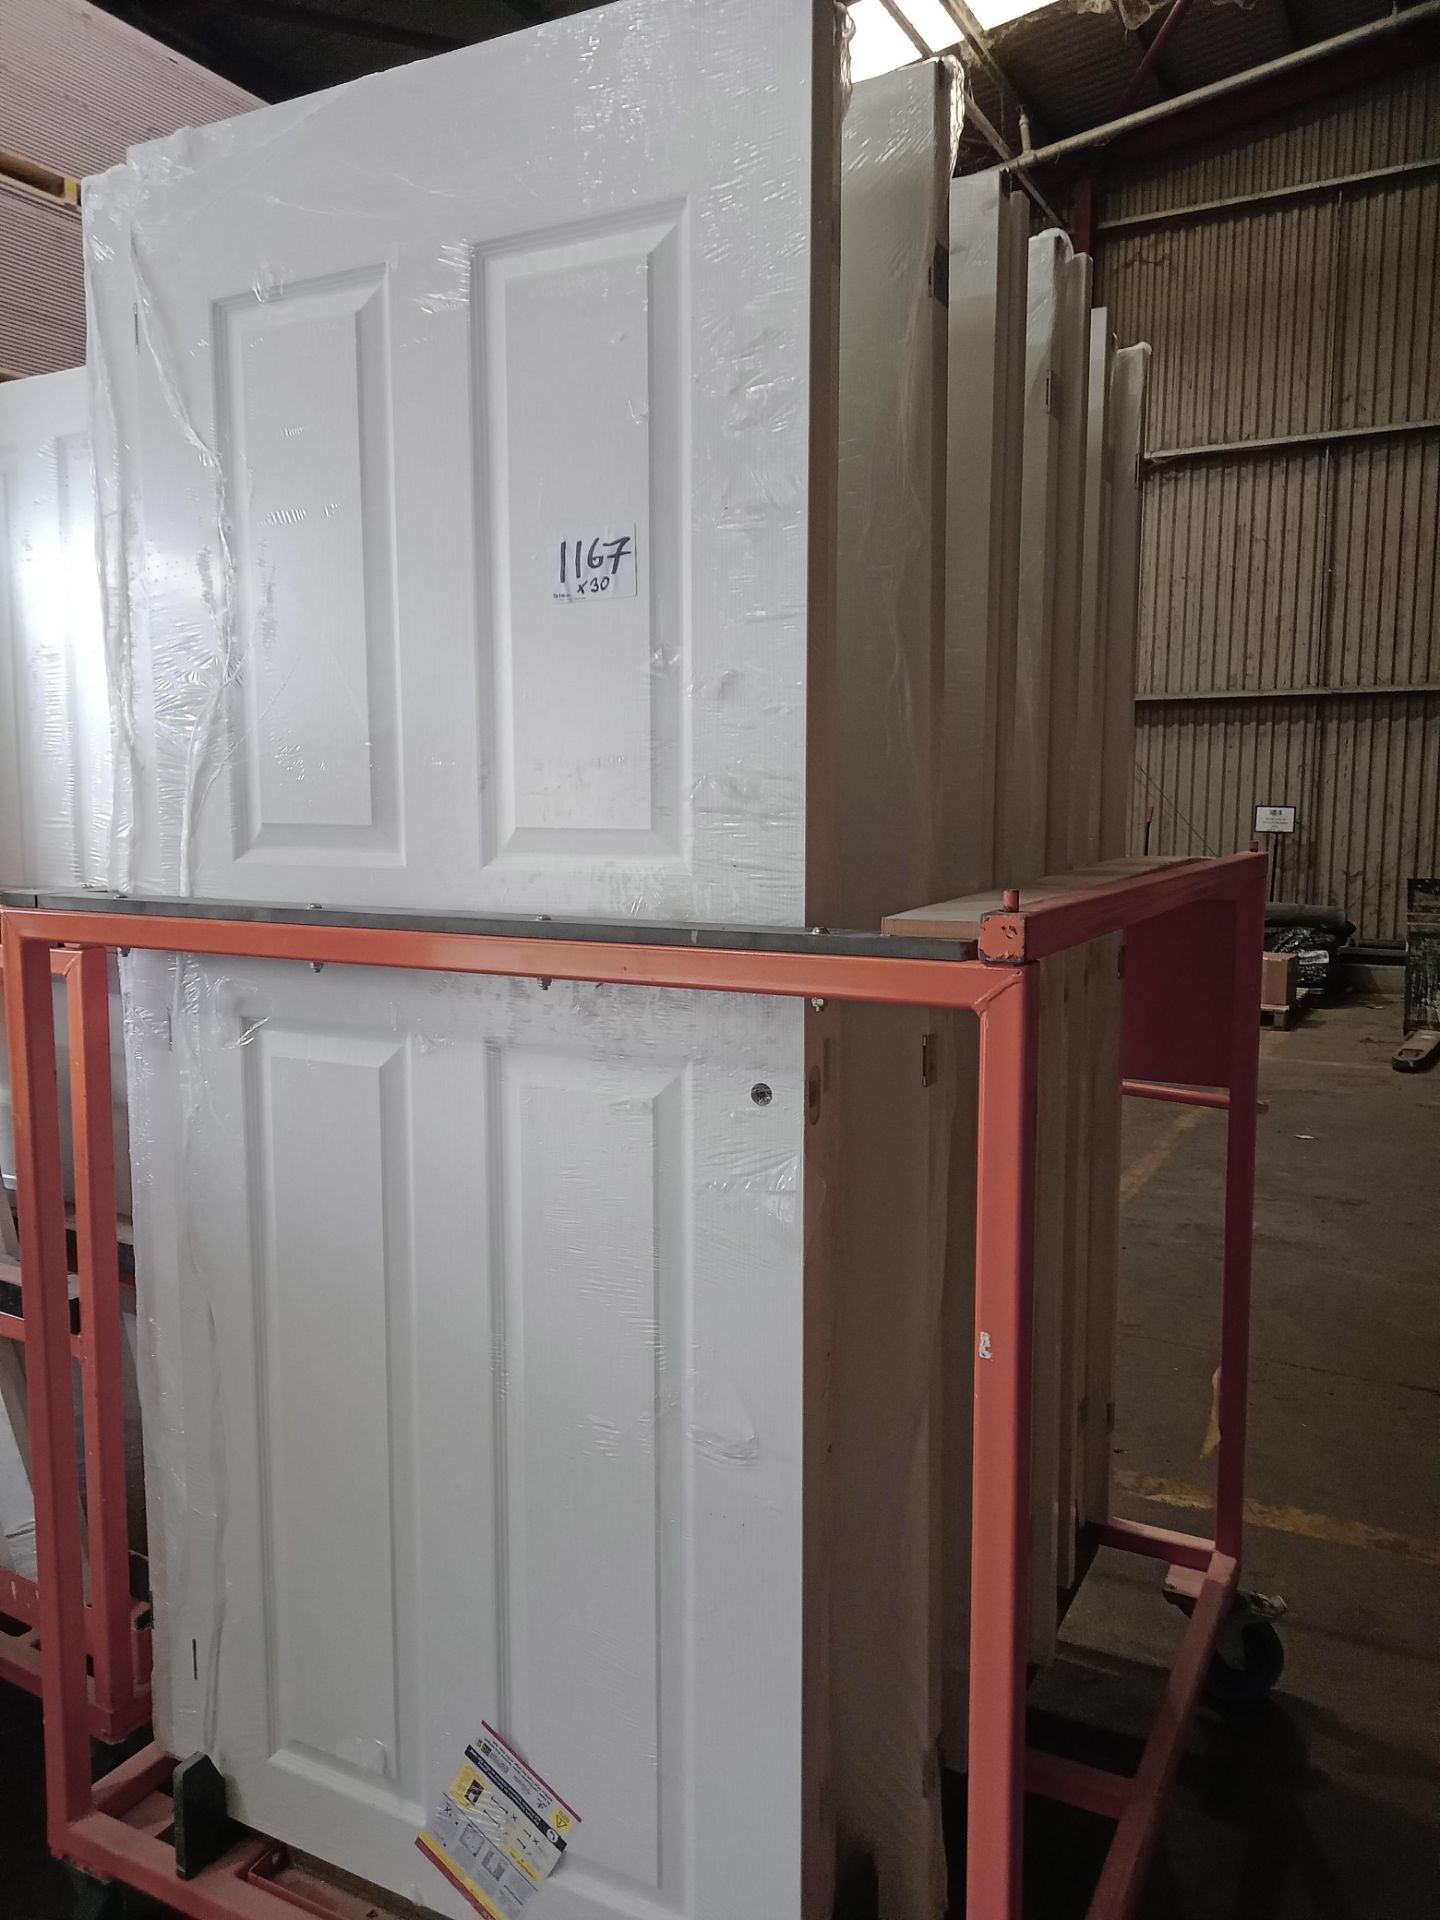 30: 840x2000 Internal Doors as Lotted - Image 2 of 2